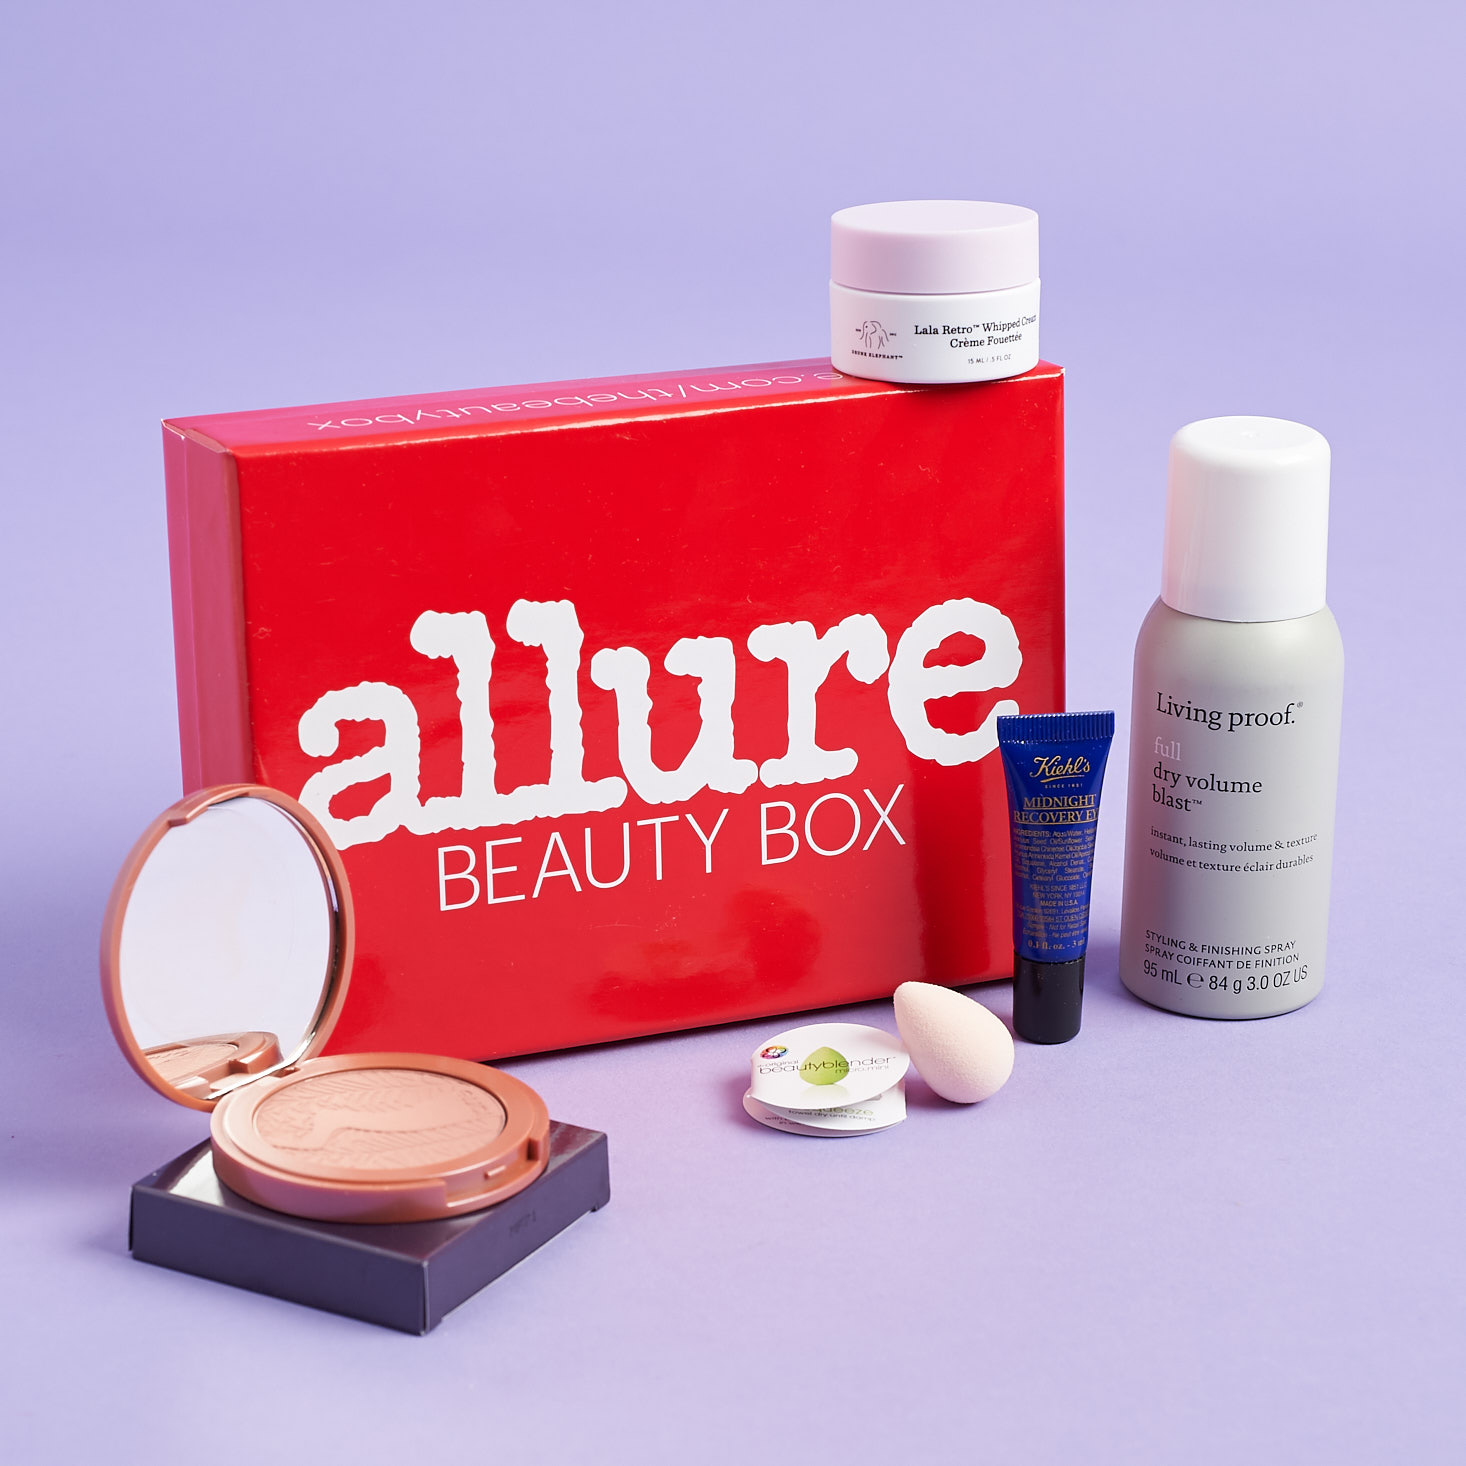 Allure Beauty Box Subscriptions Start with September 2017 Box! My